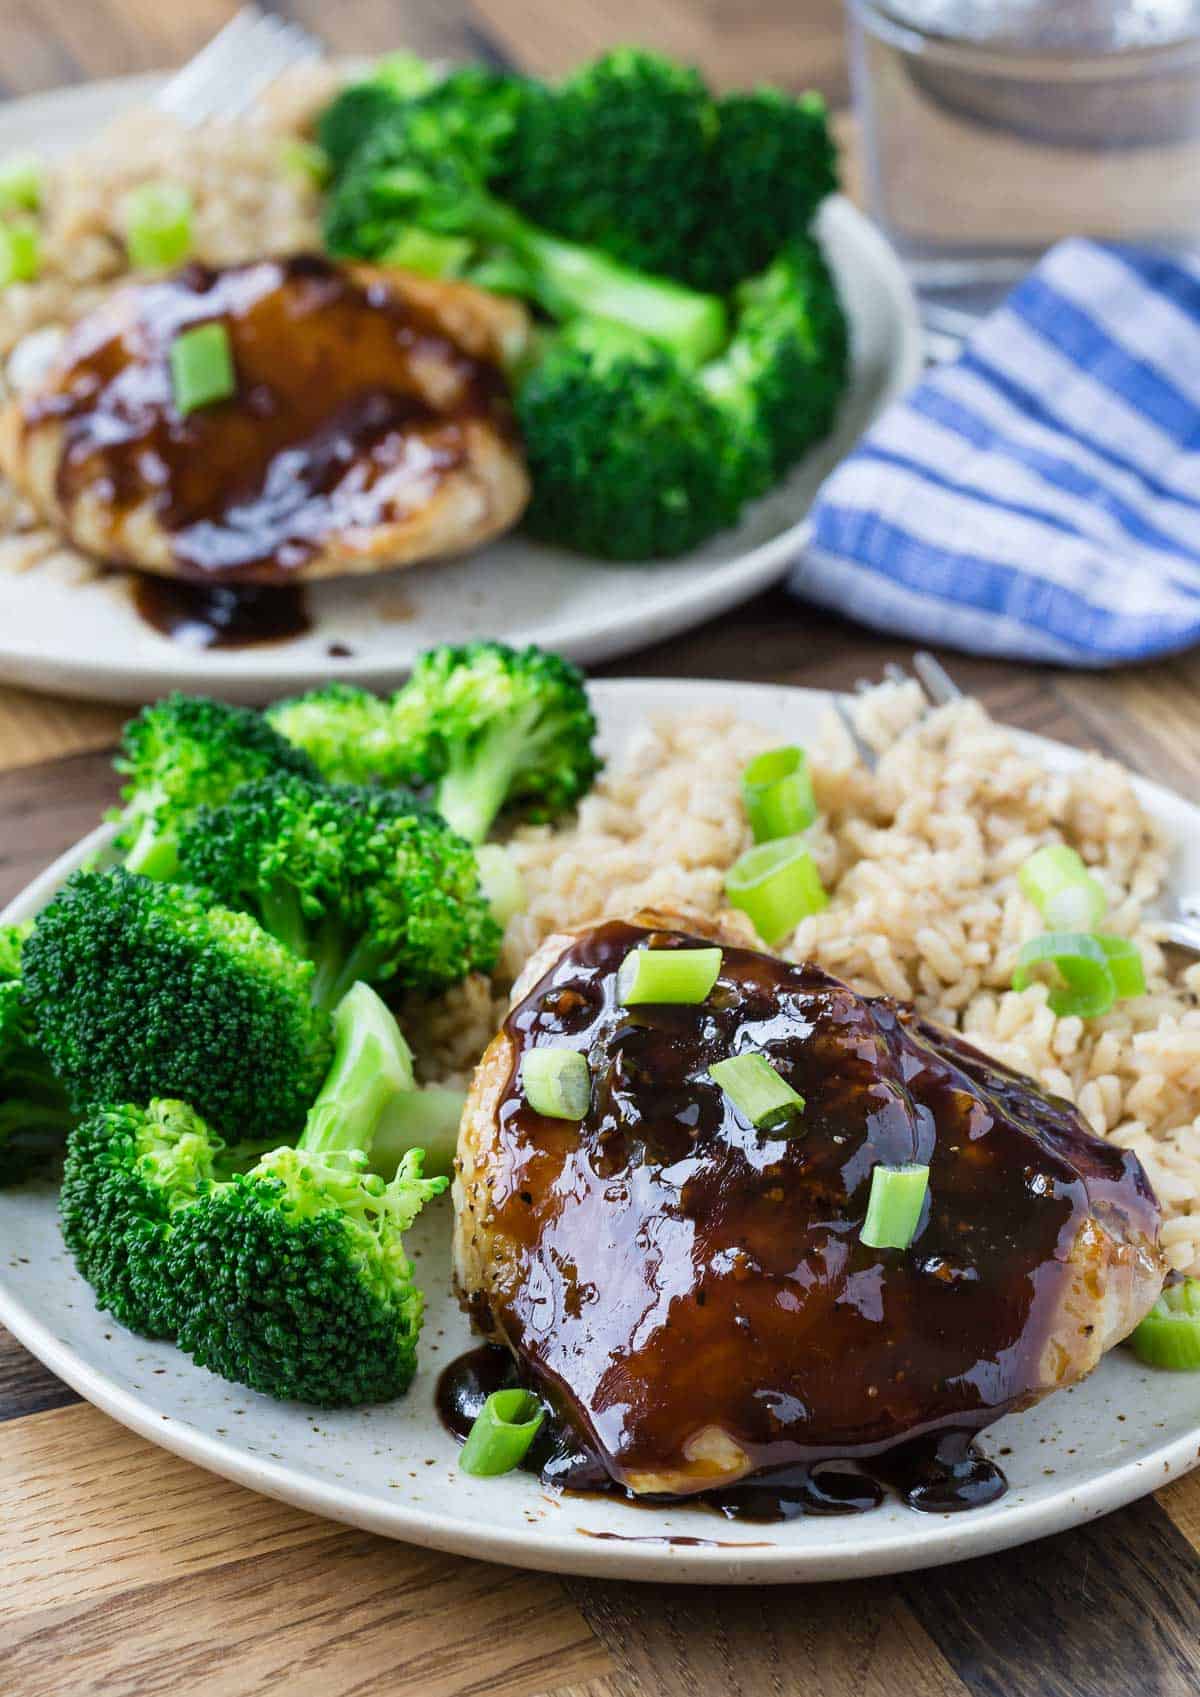 Shiny balsamic glazed chicken with broccoli and rice.